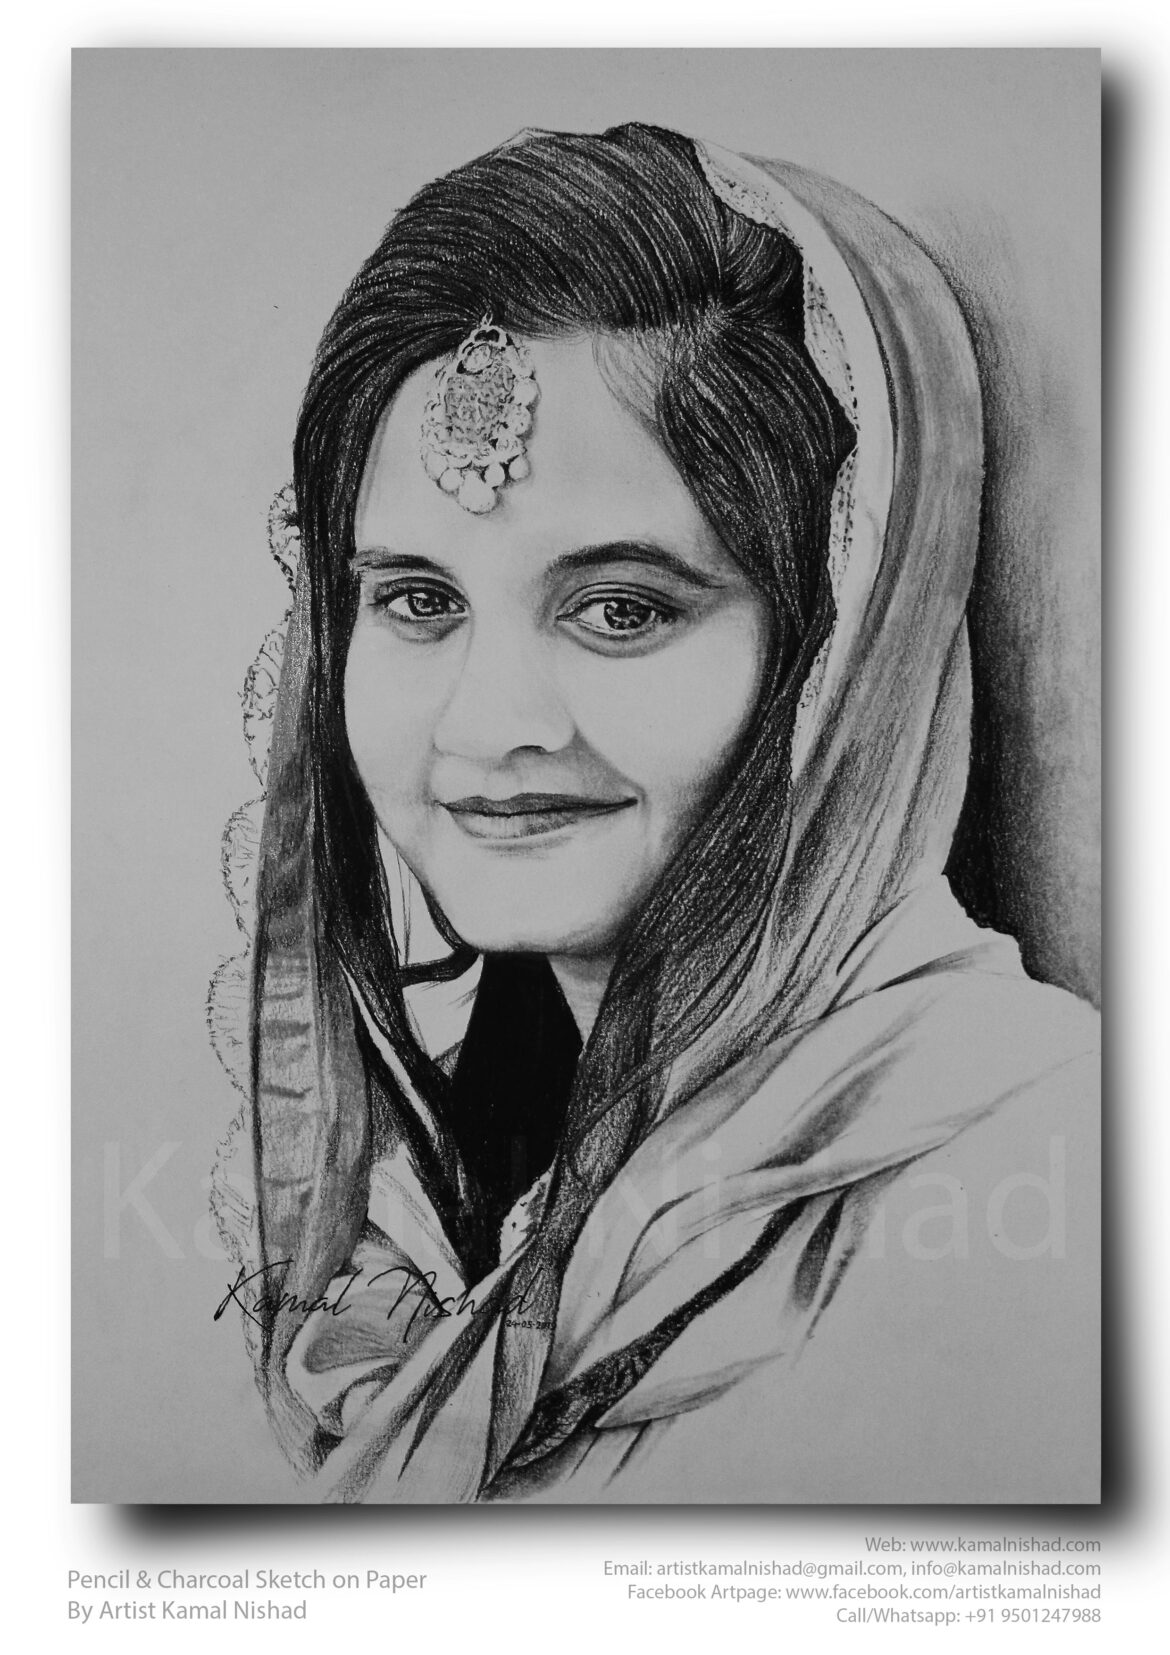 A SMILE LIKE YOURS | Pencil & Charcoal Sketch This is a Handmade Sketch made with Pencil & Charcoal “A SMILE LIKE YOURS”. One of my client/customer (MALE) wanted me to draw this portrait for a birthday gift. SIZE: A3 Created by © Kamal Nishad. All rights reserved.